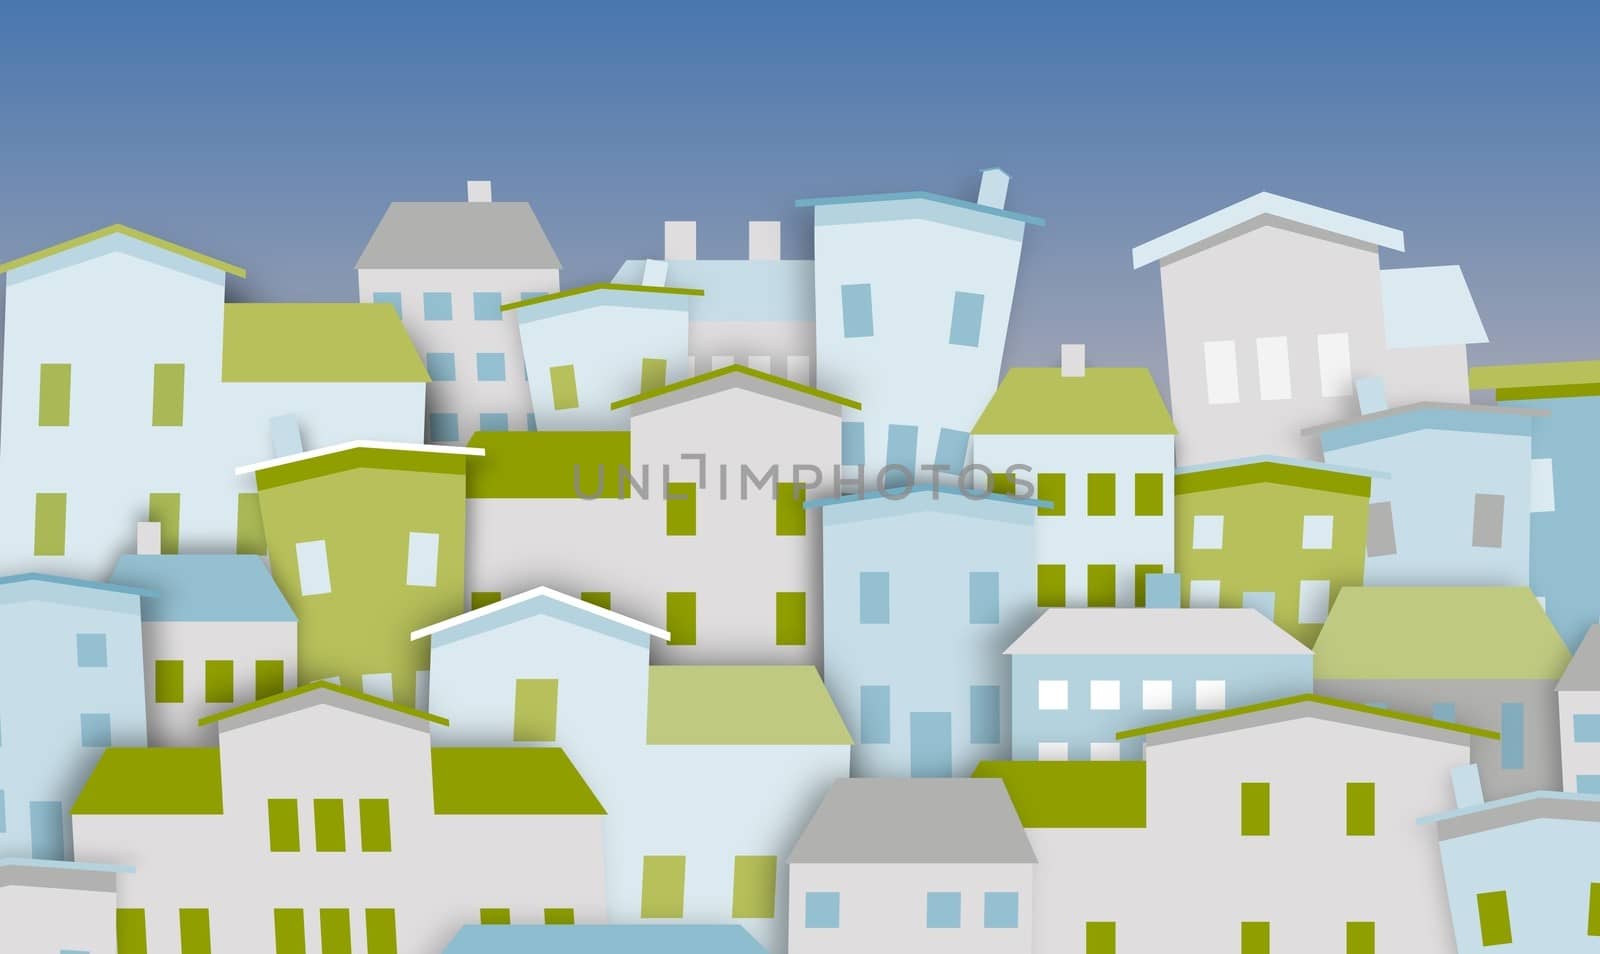 Illustration of a group of houses in green and blue